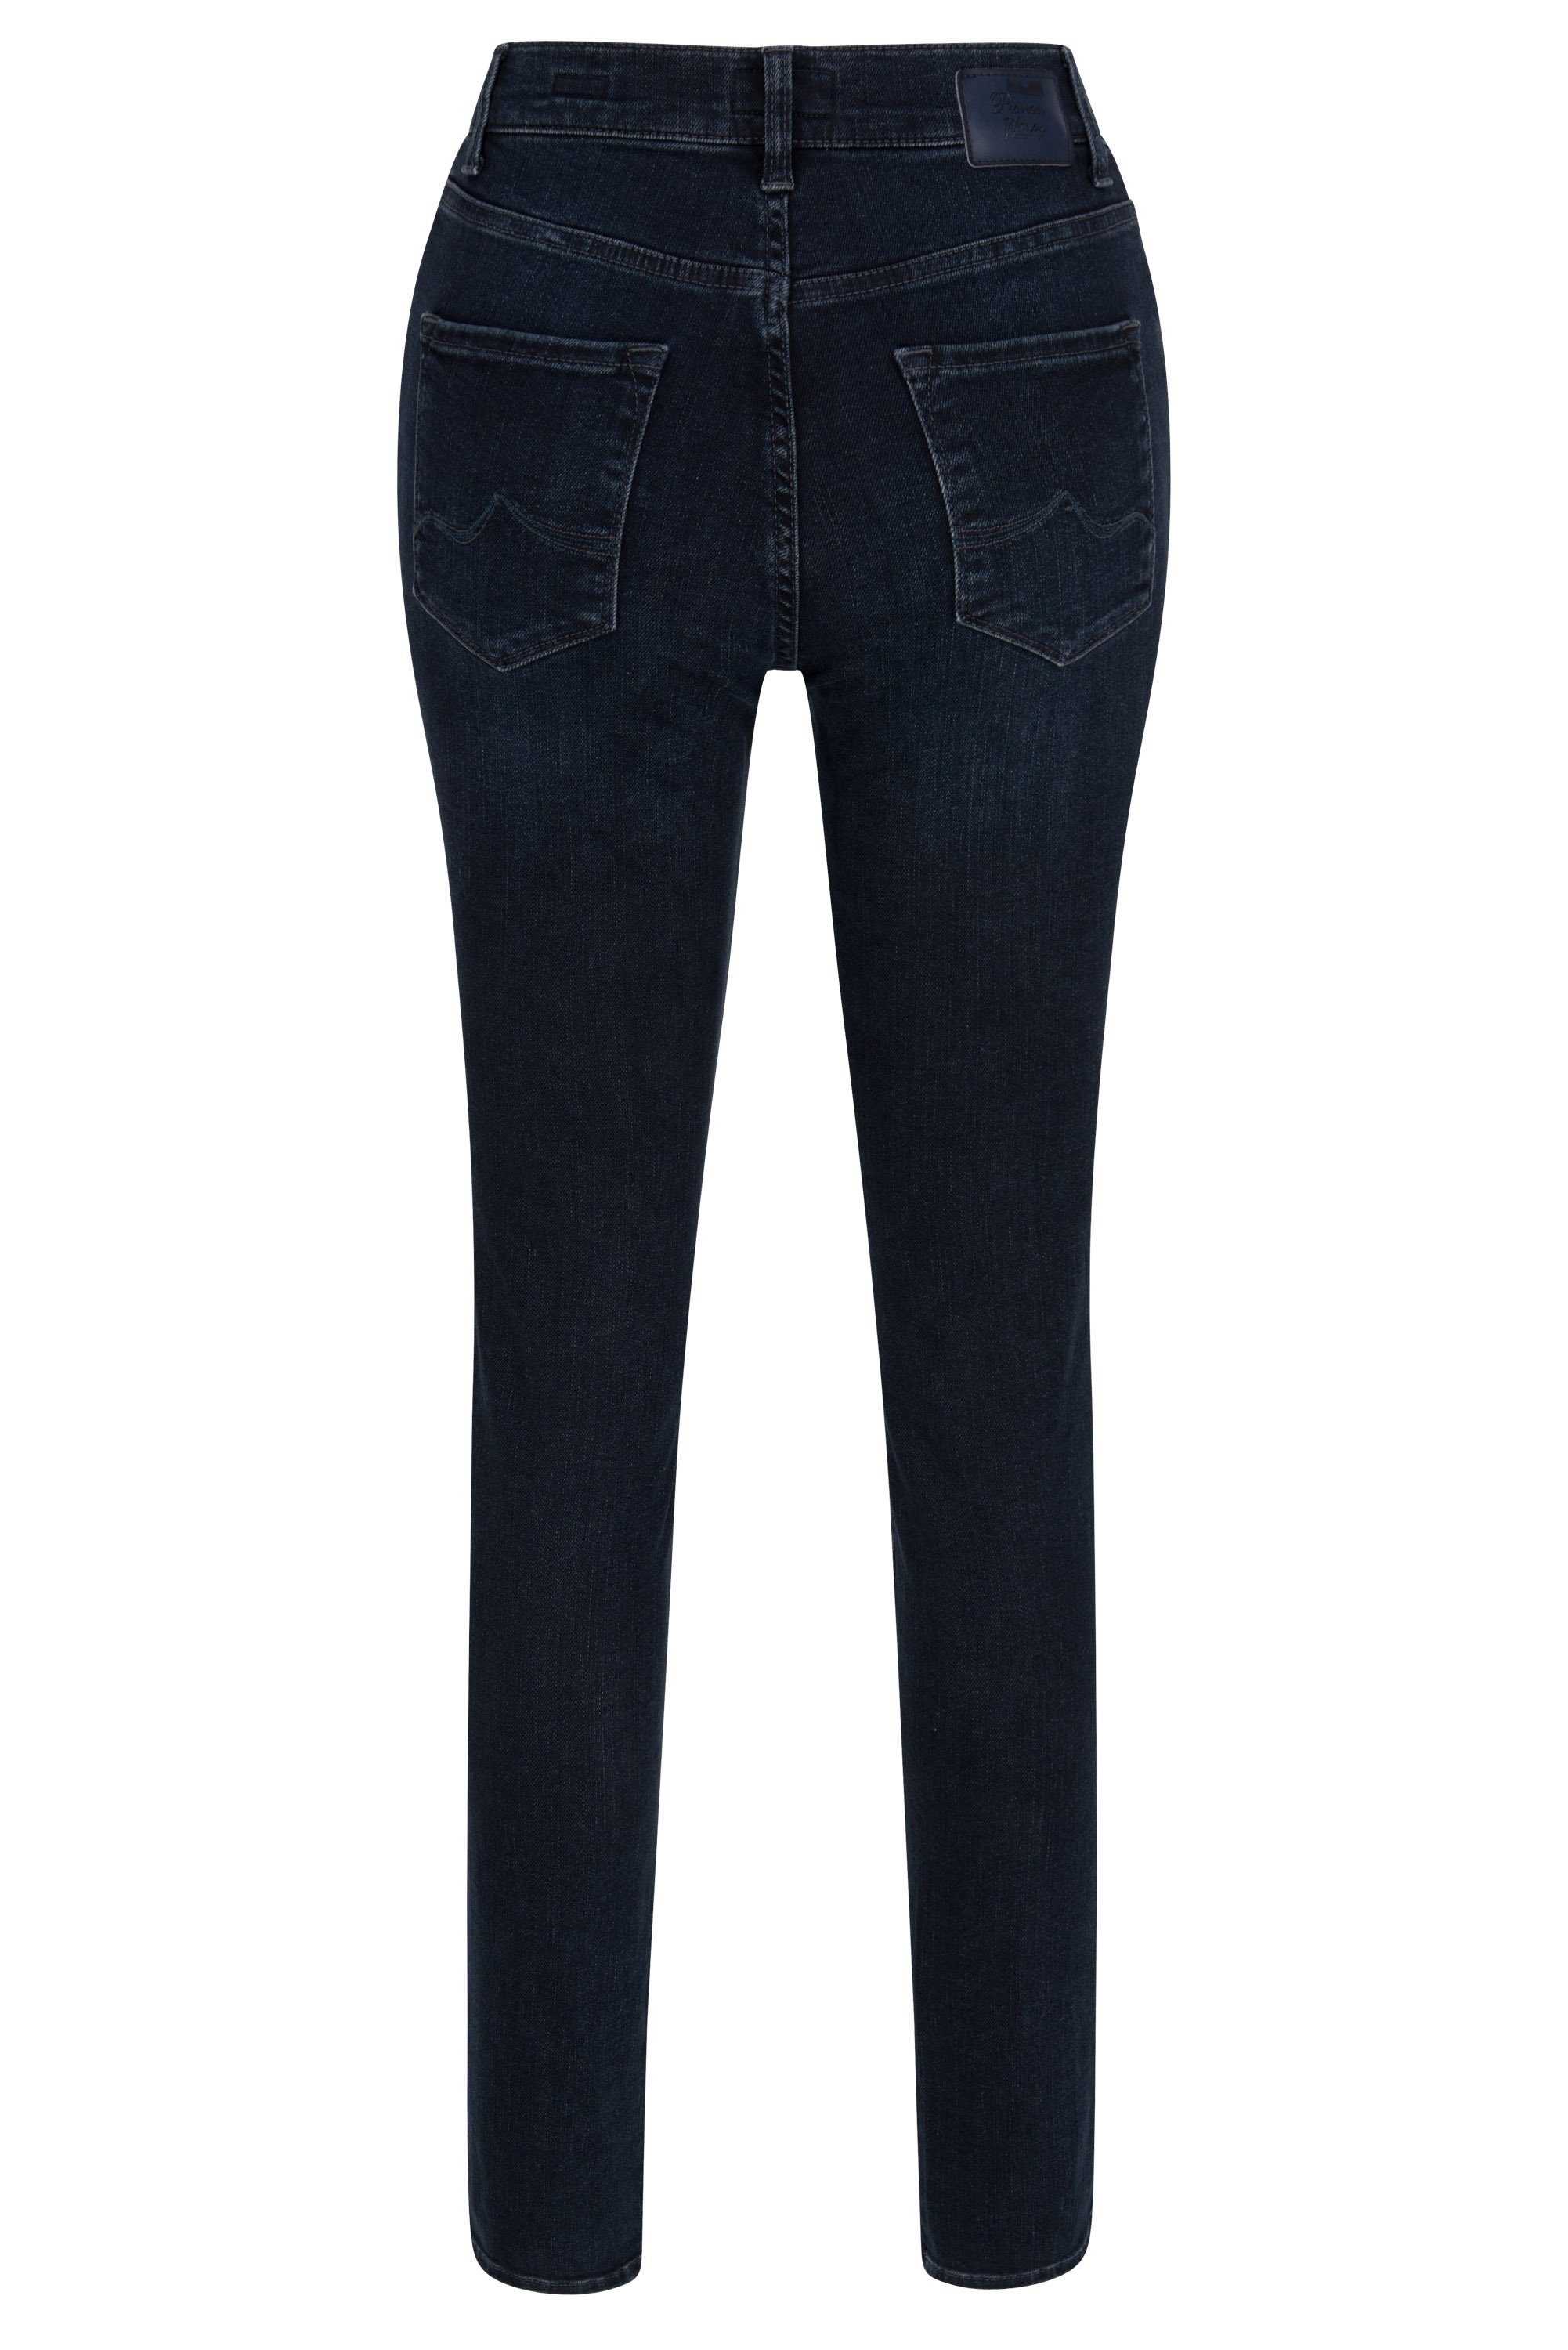 - KATY Stretch-Jeans 5011.62 PIONEER Pioneer blue 3011 out dark washed Jeans POWERSTRETCH Authentic